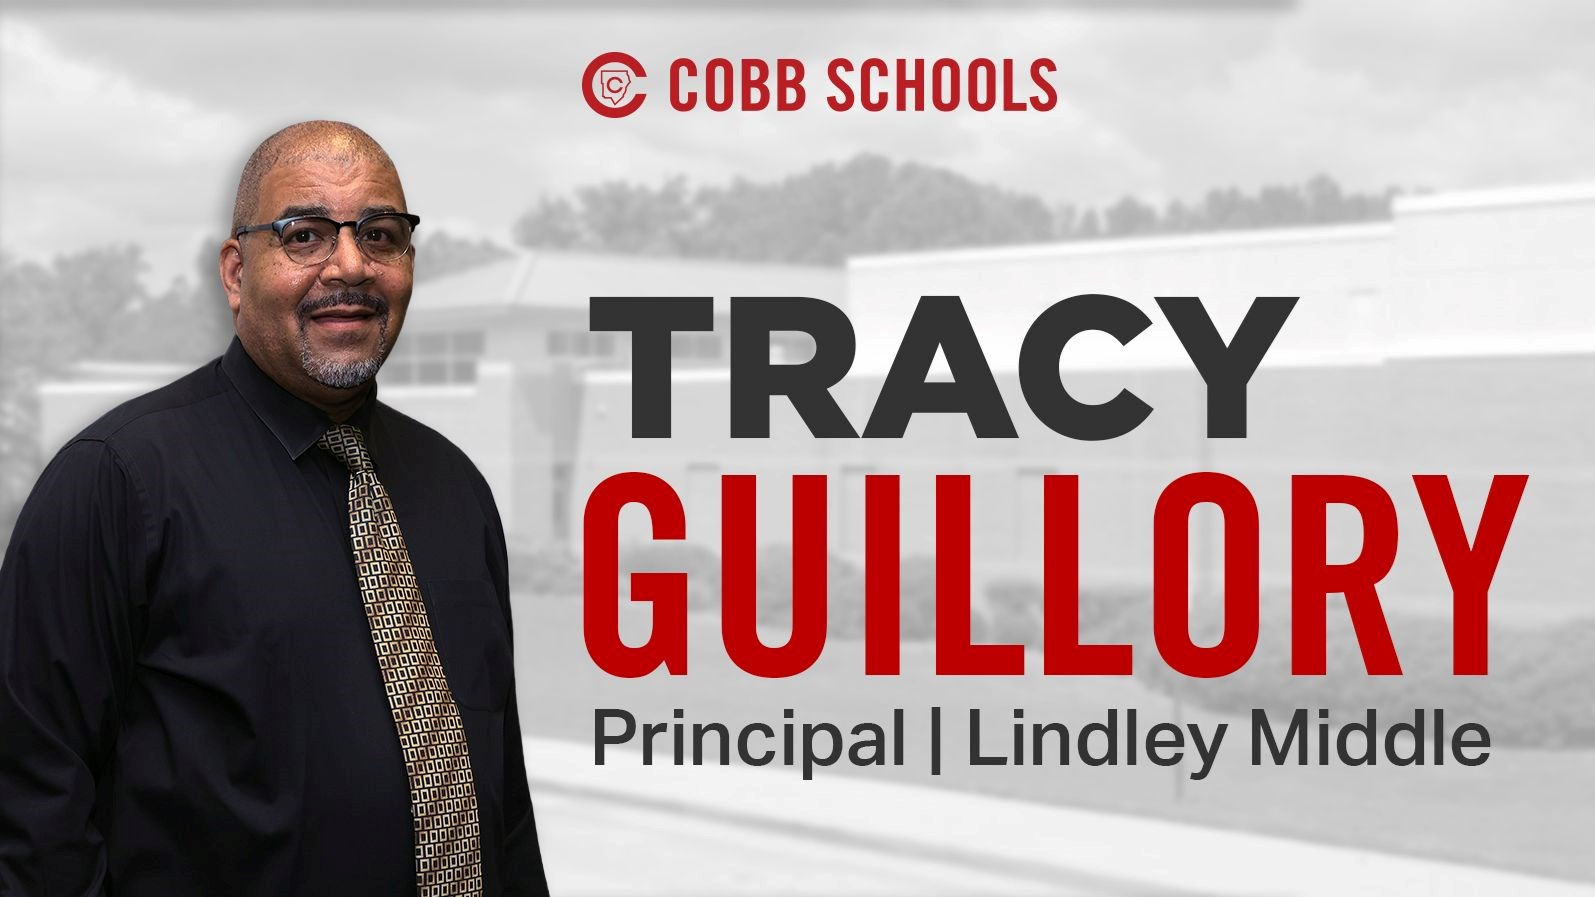 Tracy Guillory was named principal of Lindley Middle School.